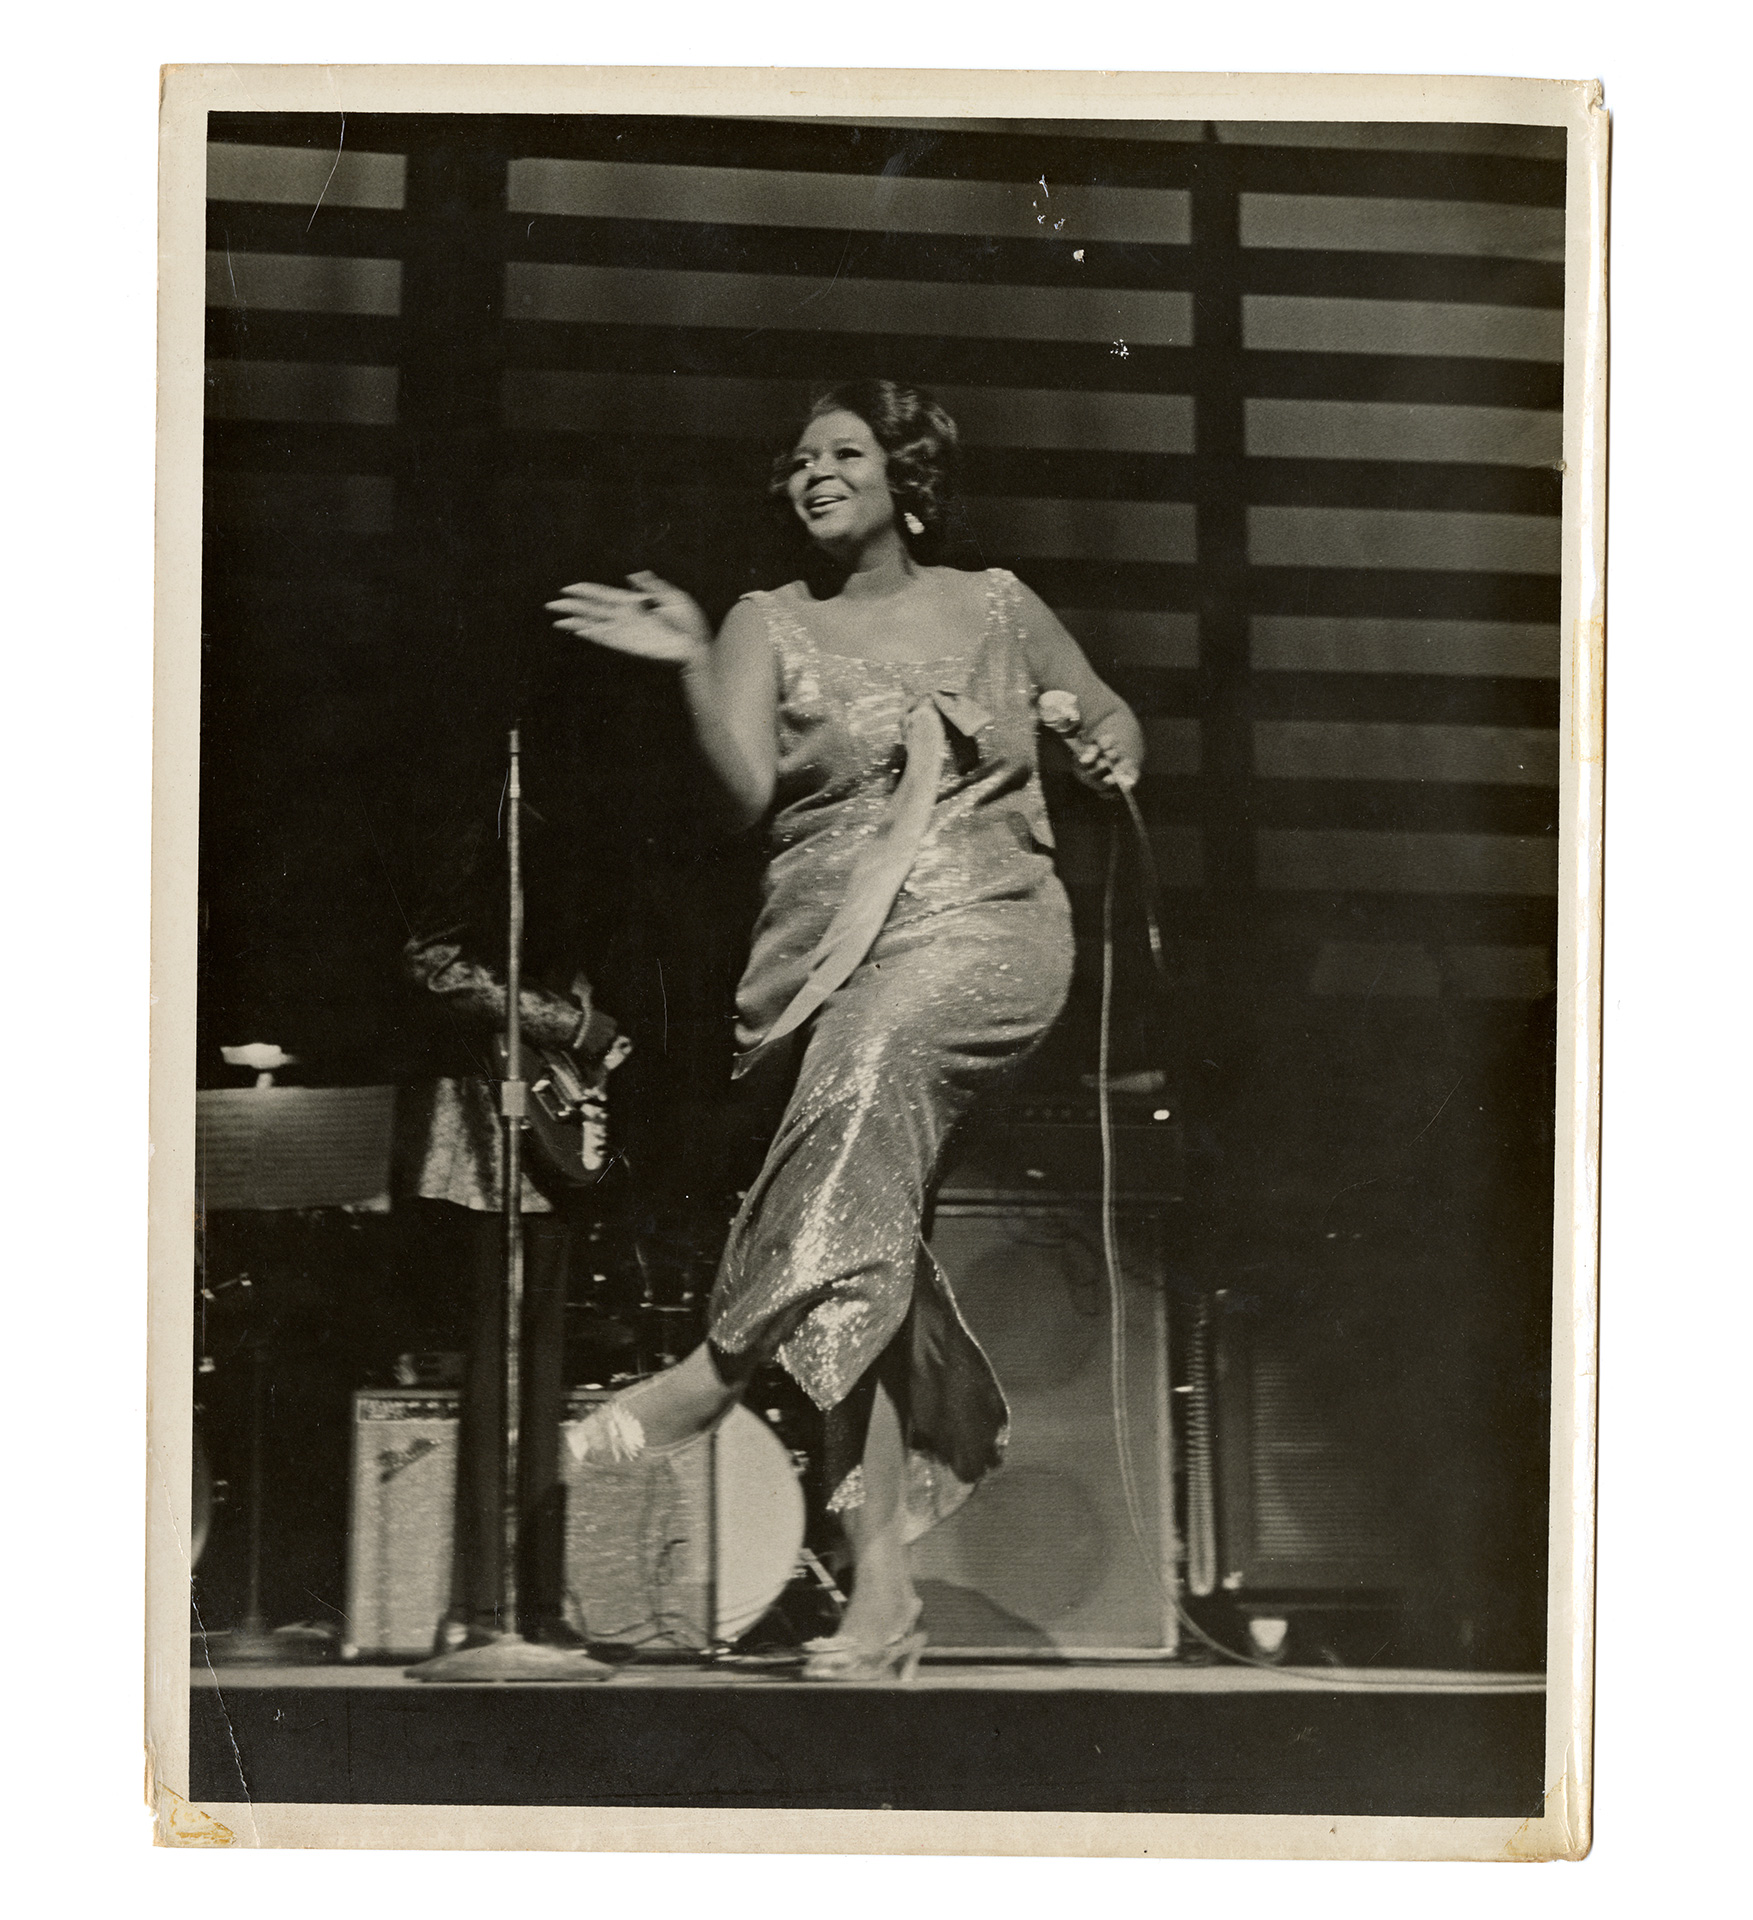 Gloria Walker on stage at Harlem's Apollo Theater in October of 1968 (photograph courtesy of Georgia College Special Collections)